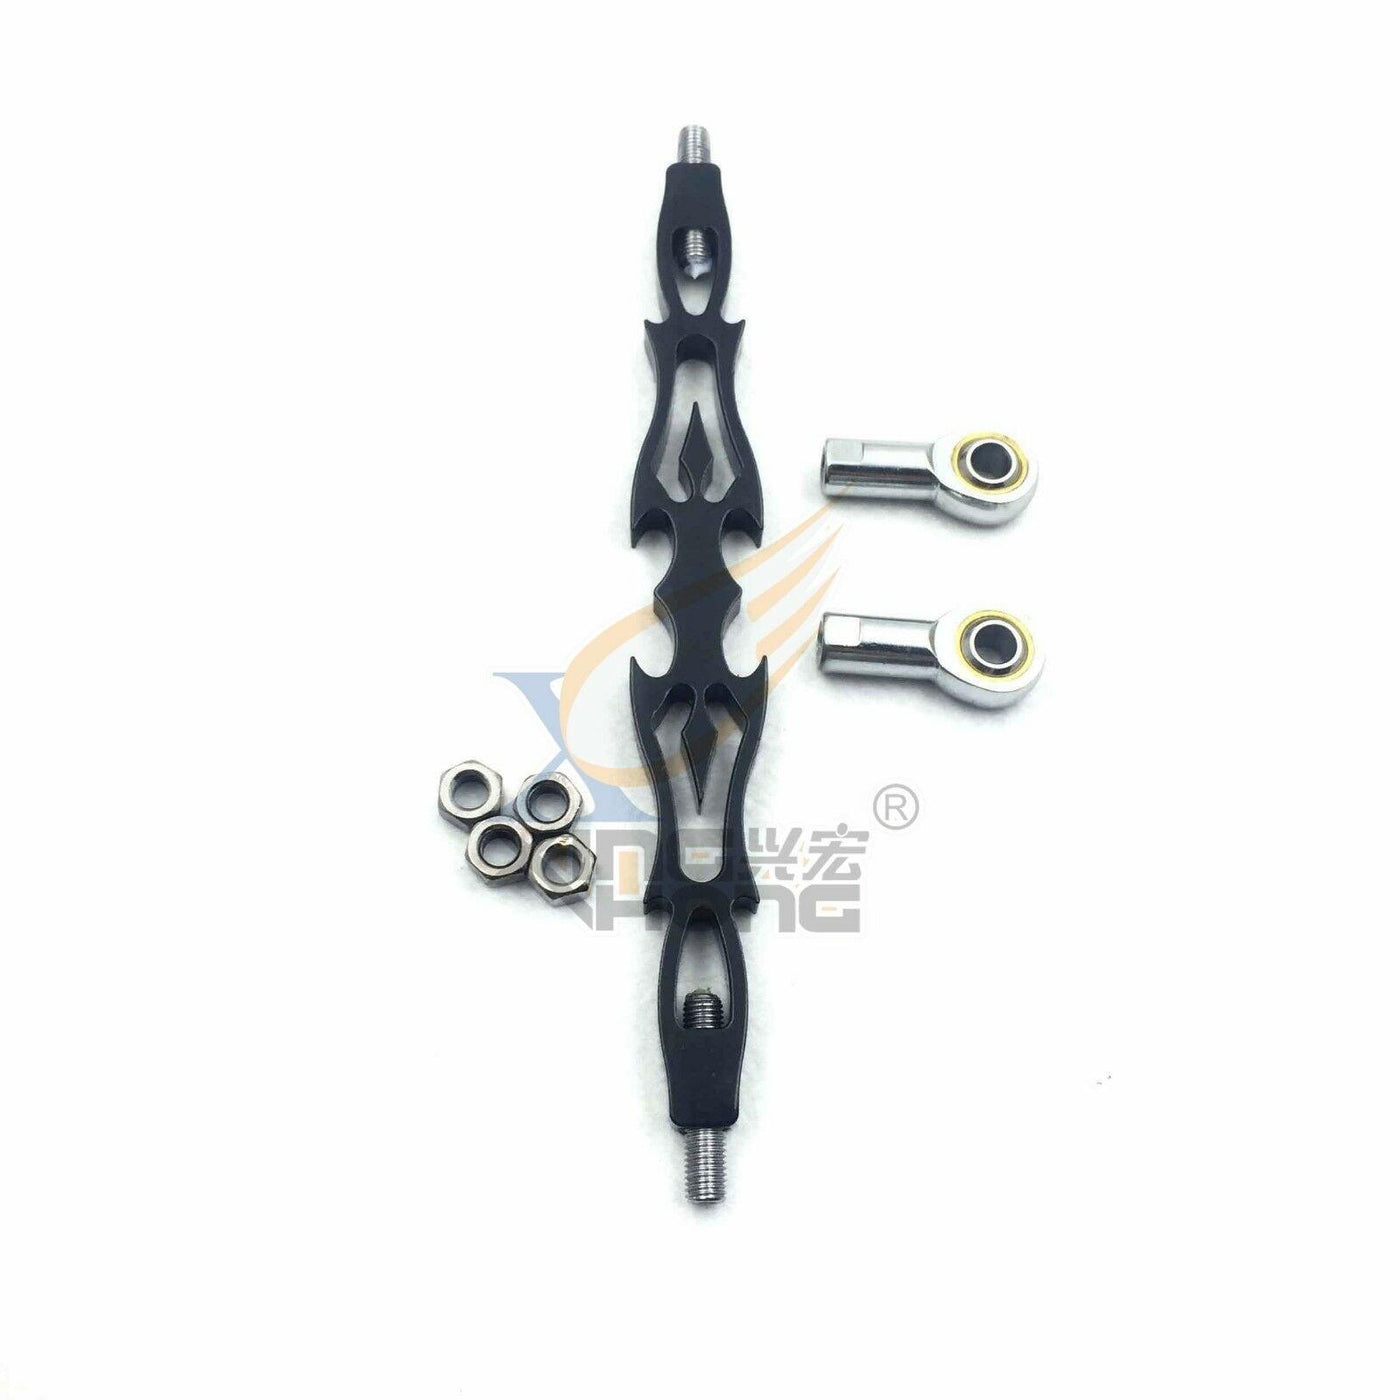 BLACK Spear Shift Linkage For Harley Softail Fxdwg Dyna Glide Flhr Flht - Moto Life Products